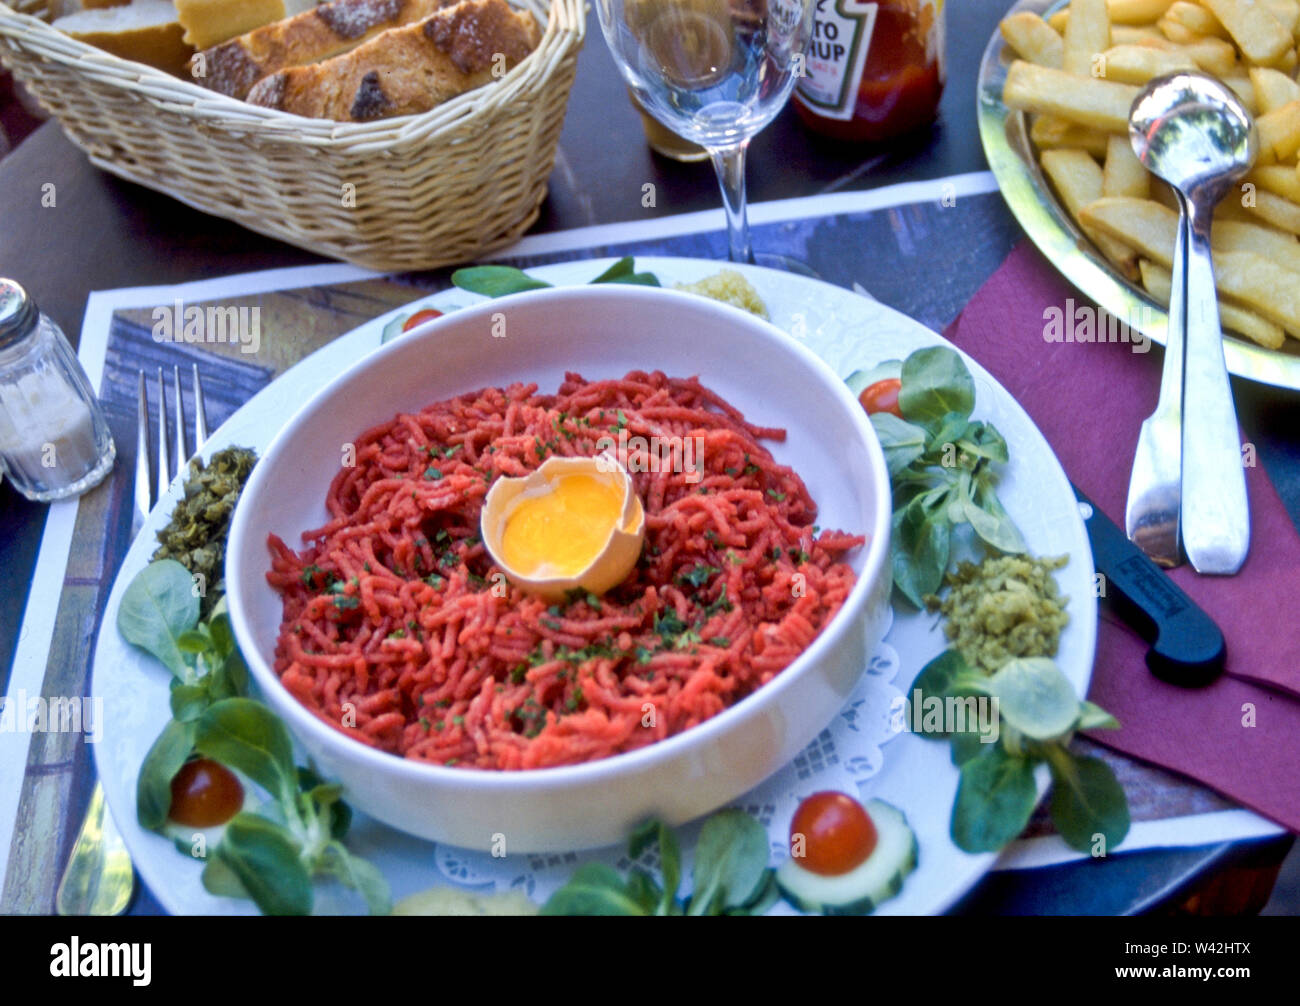 Steak Tartare is a meat dish made of ground or minced meat served with onions, capers, Worchestire sauce and others, topped with a raw egg. Stock Photo